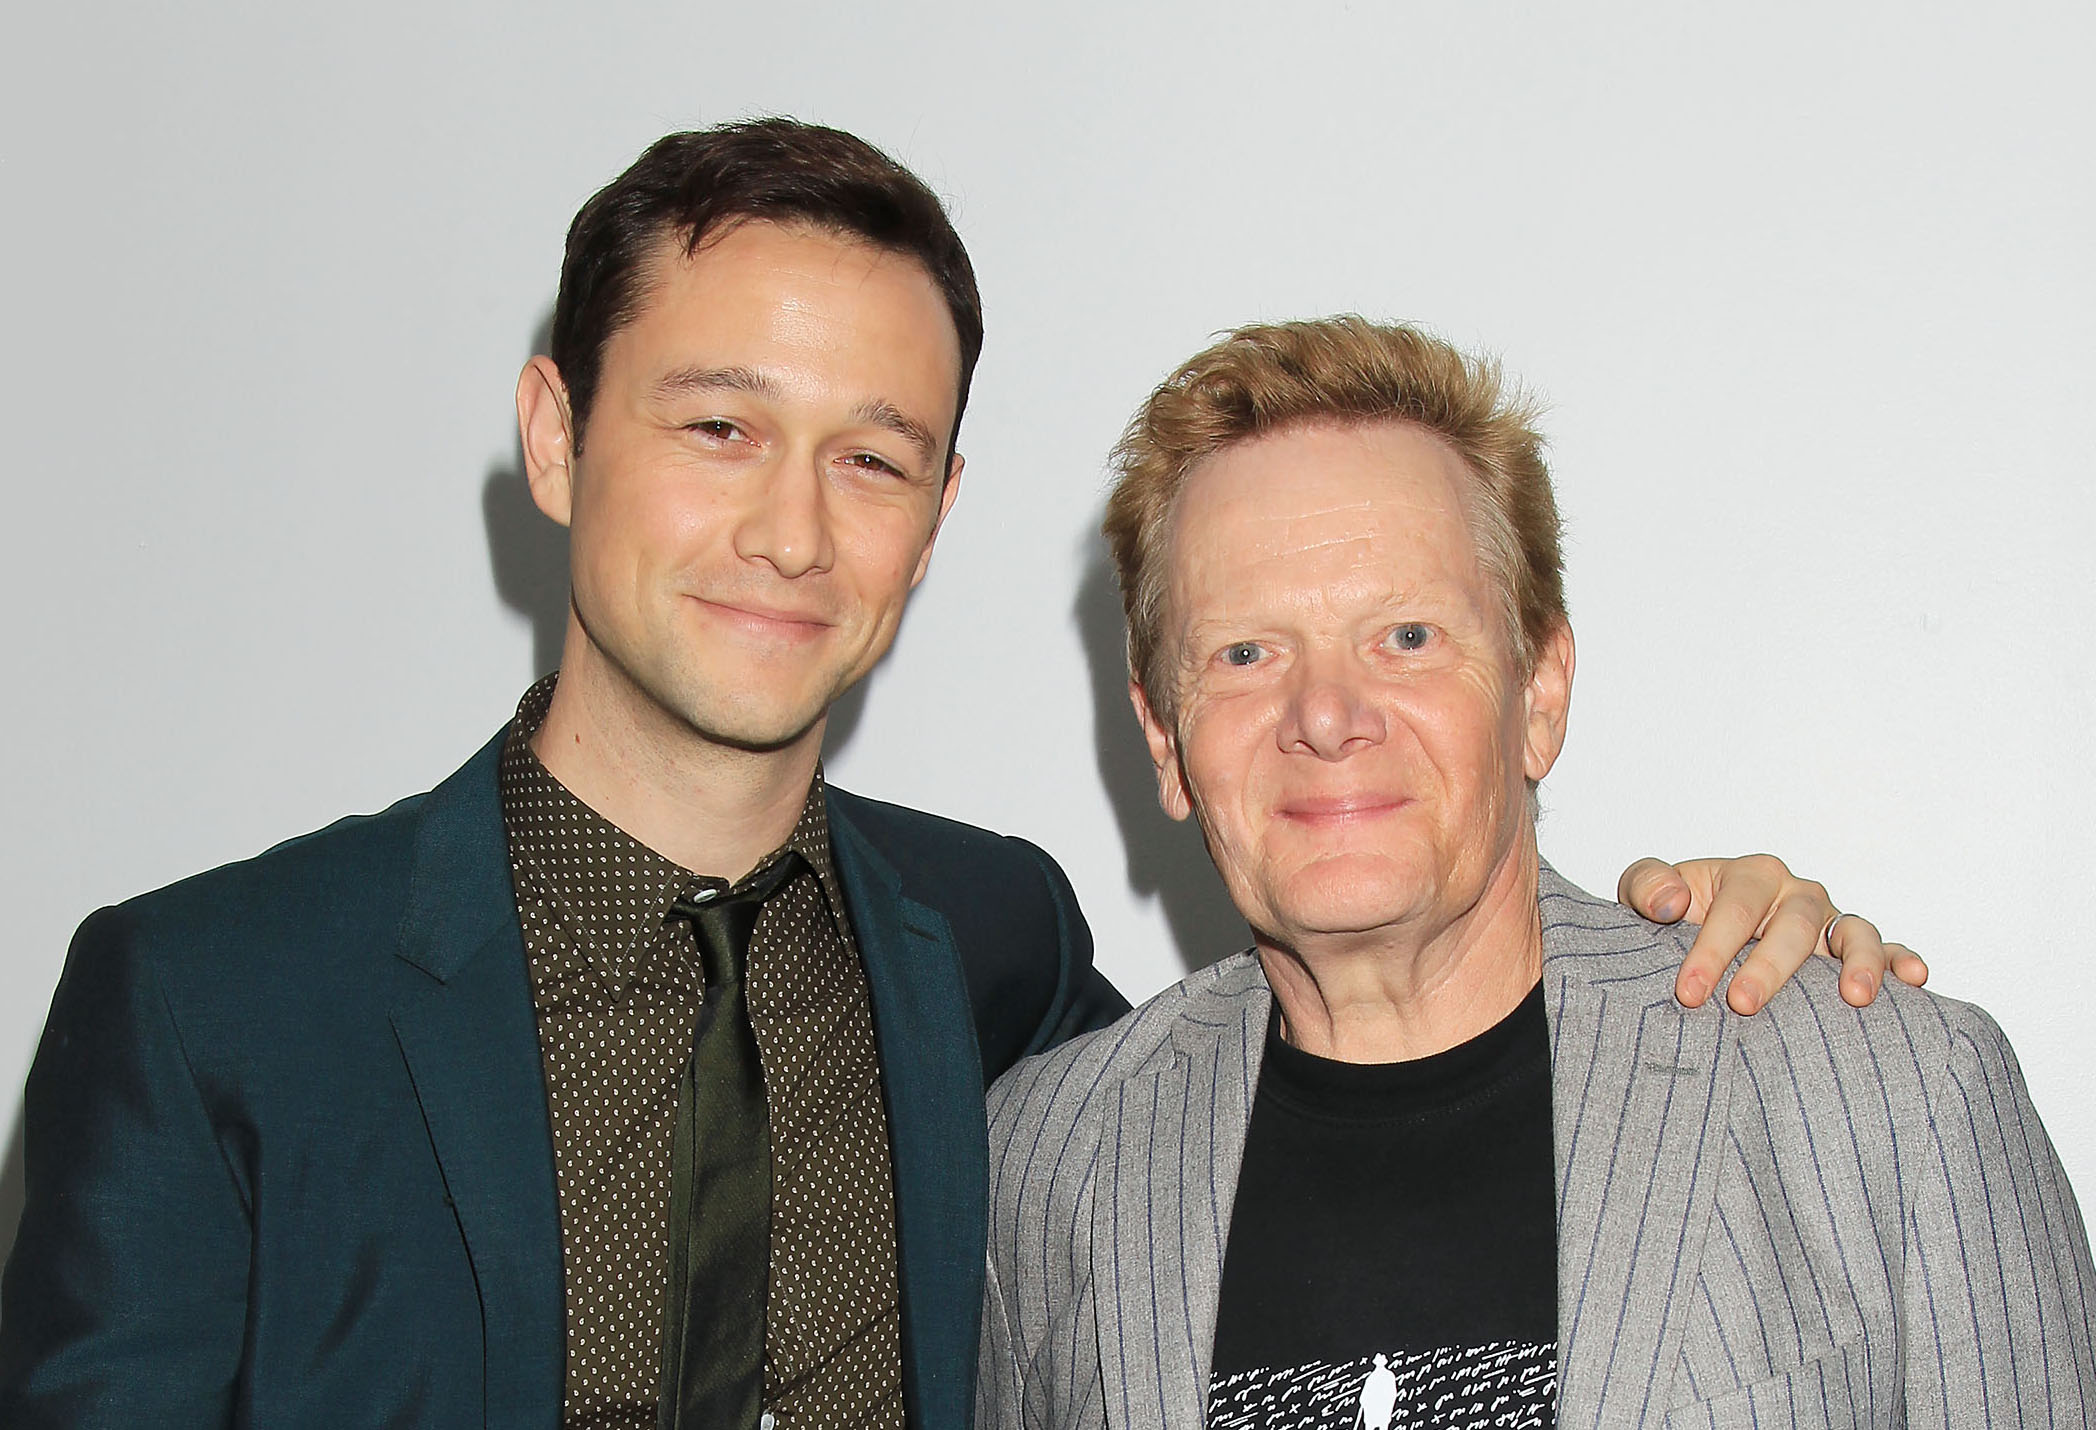 Joseph Gordon-Levitt and Philippe Petit at the Opening Night Gala Presentation and World Premiere of "The Walk" (photo: Sony Pictures)